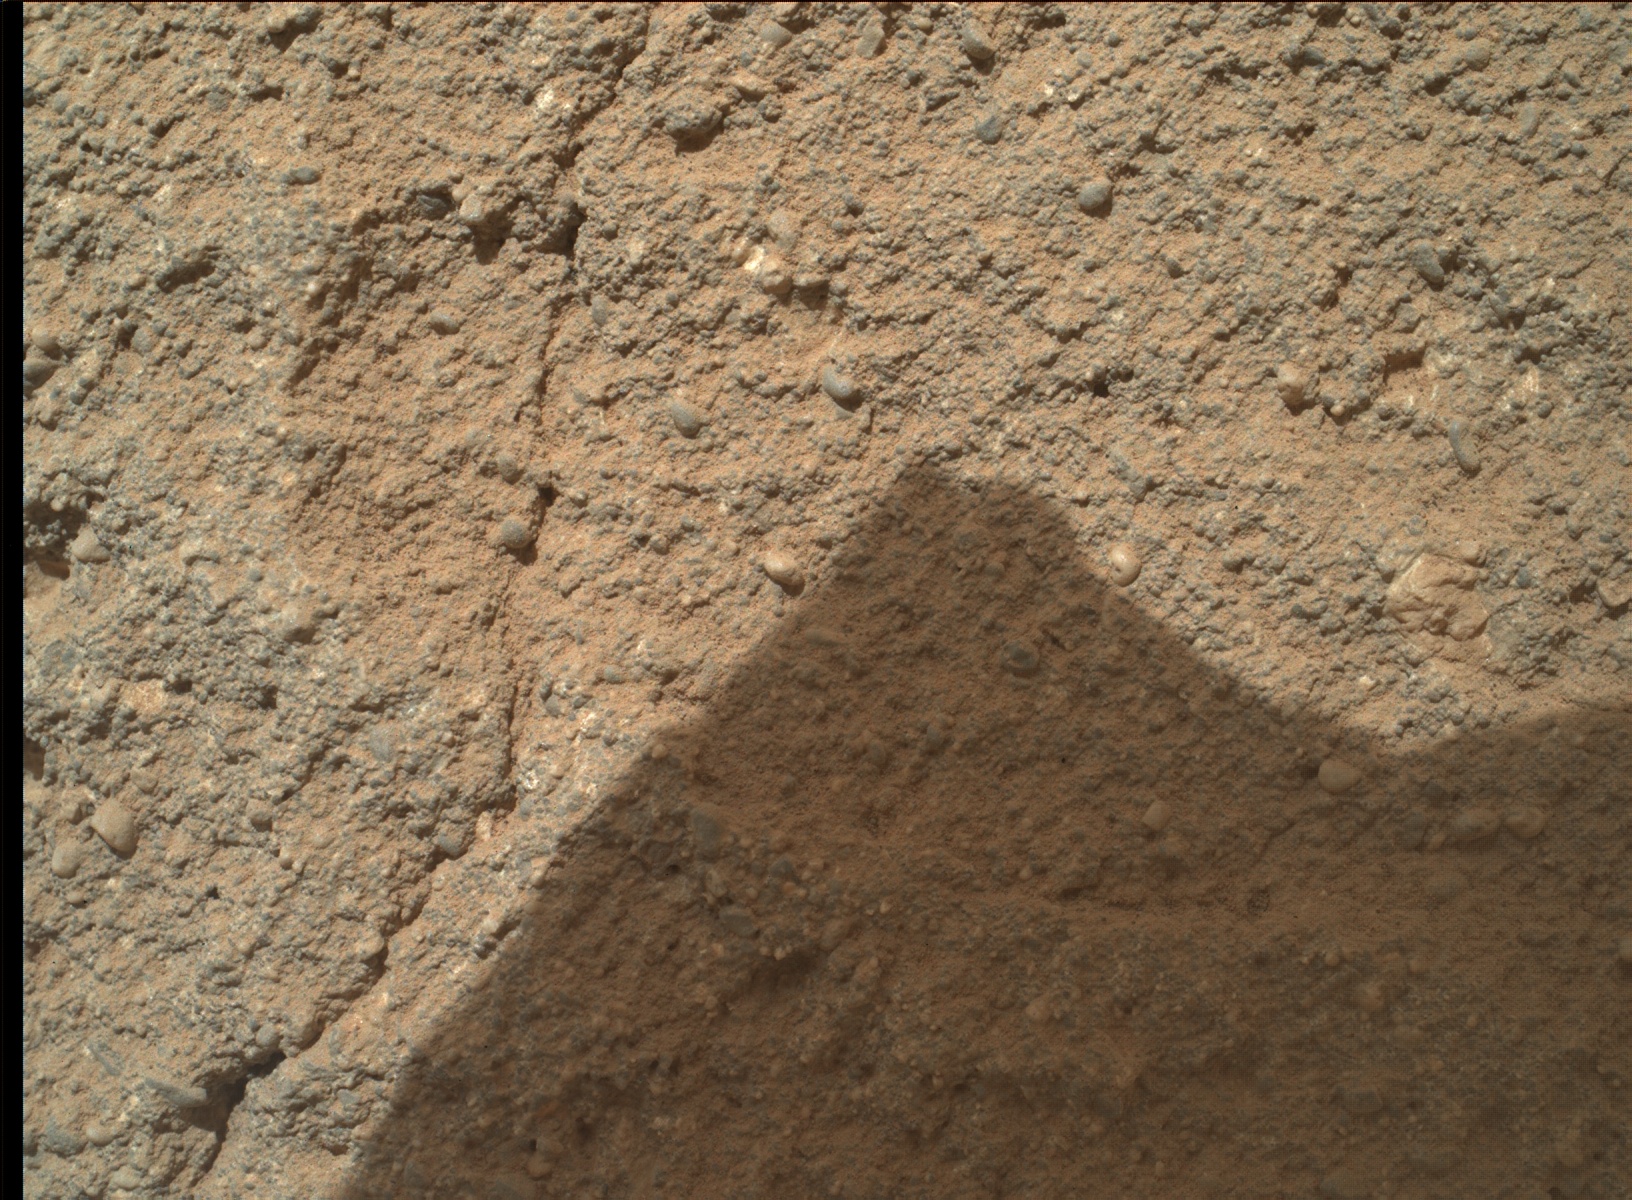 Nasa's Mars rover Curiosity acquired this image using its Mars Hand Lens Imager (MAHLI) on Sol 999